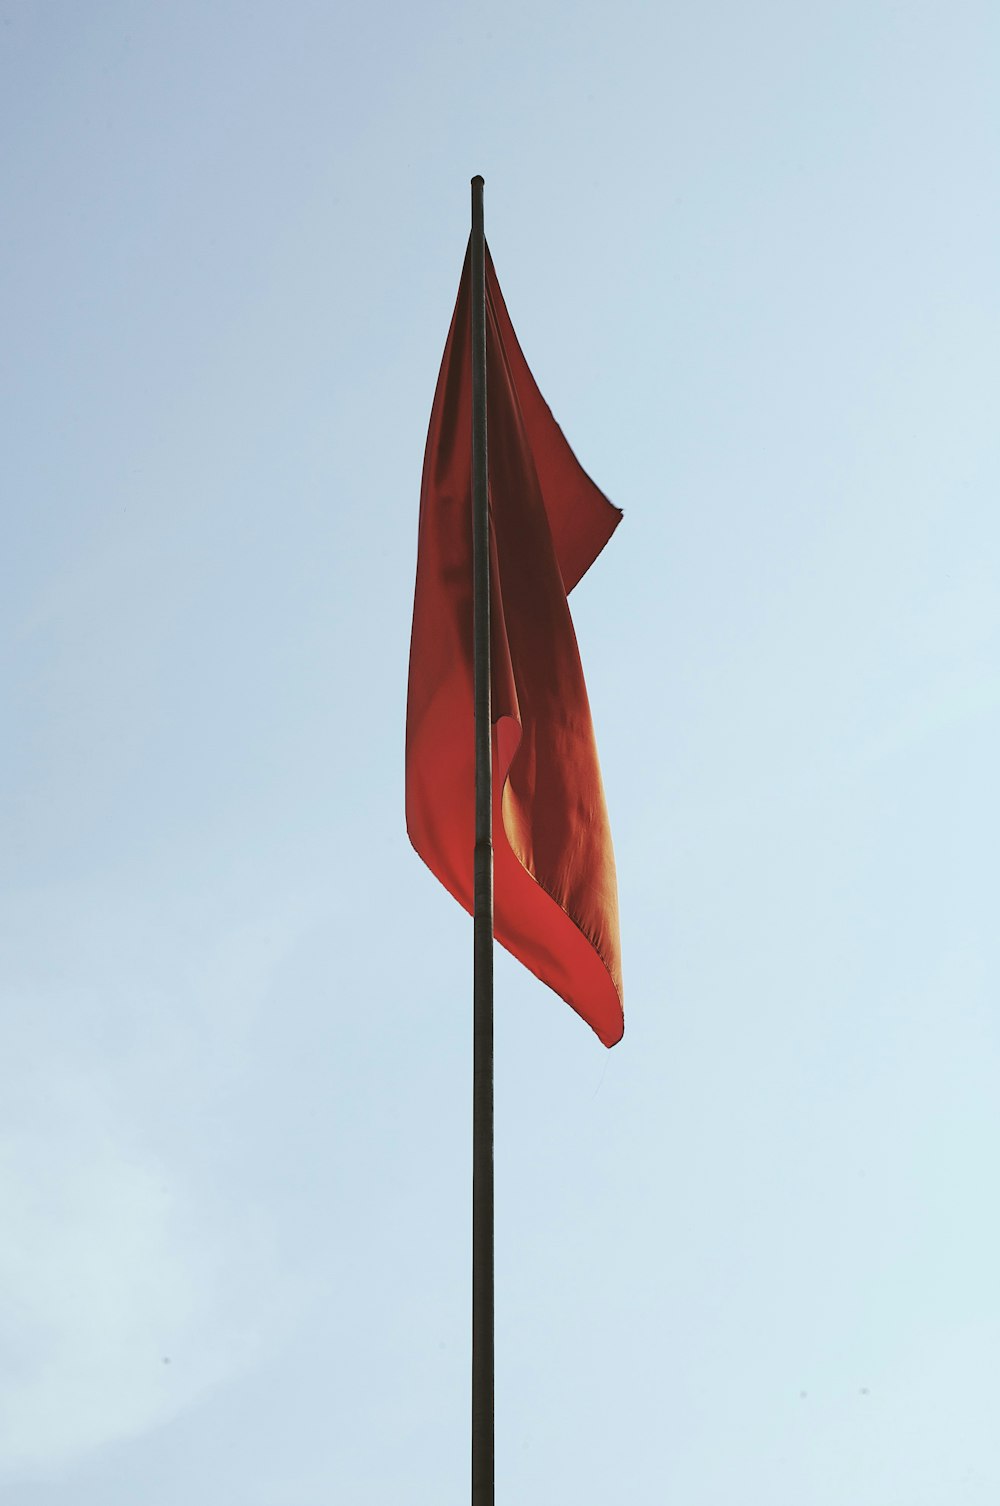 red flag on pole under white sky during daytime